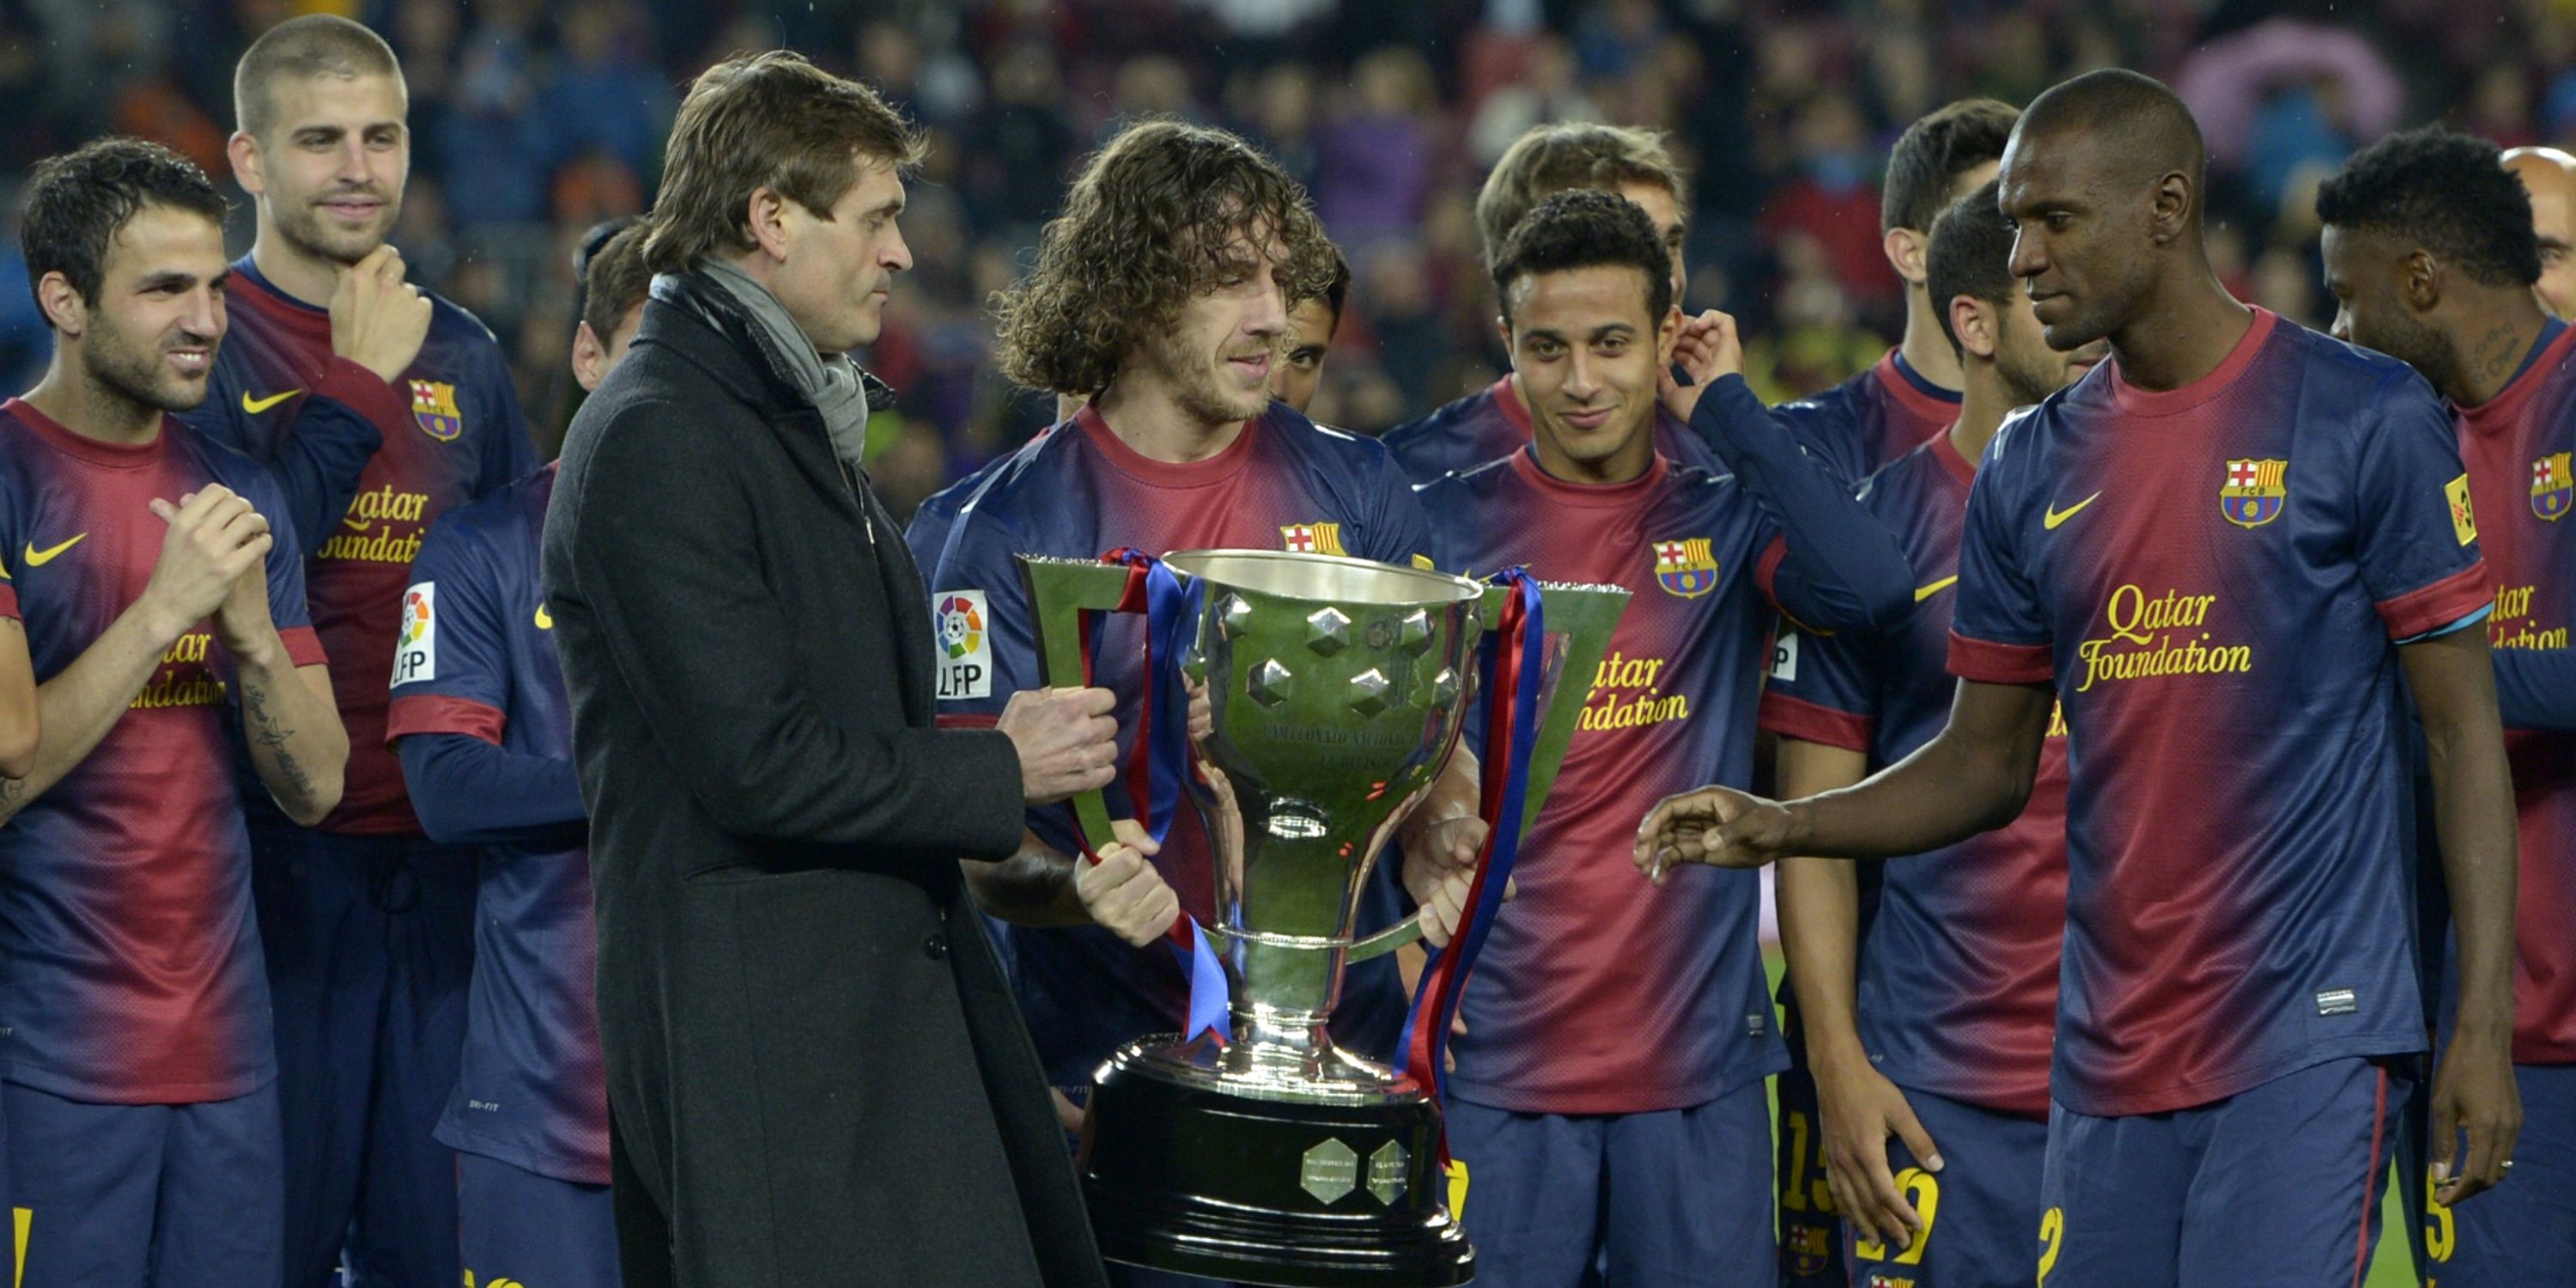 Alex Song thinking Carles Puyol wanted him to lift La Liga trophy is football’s most awkward moment